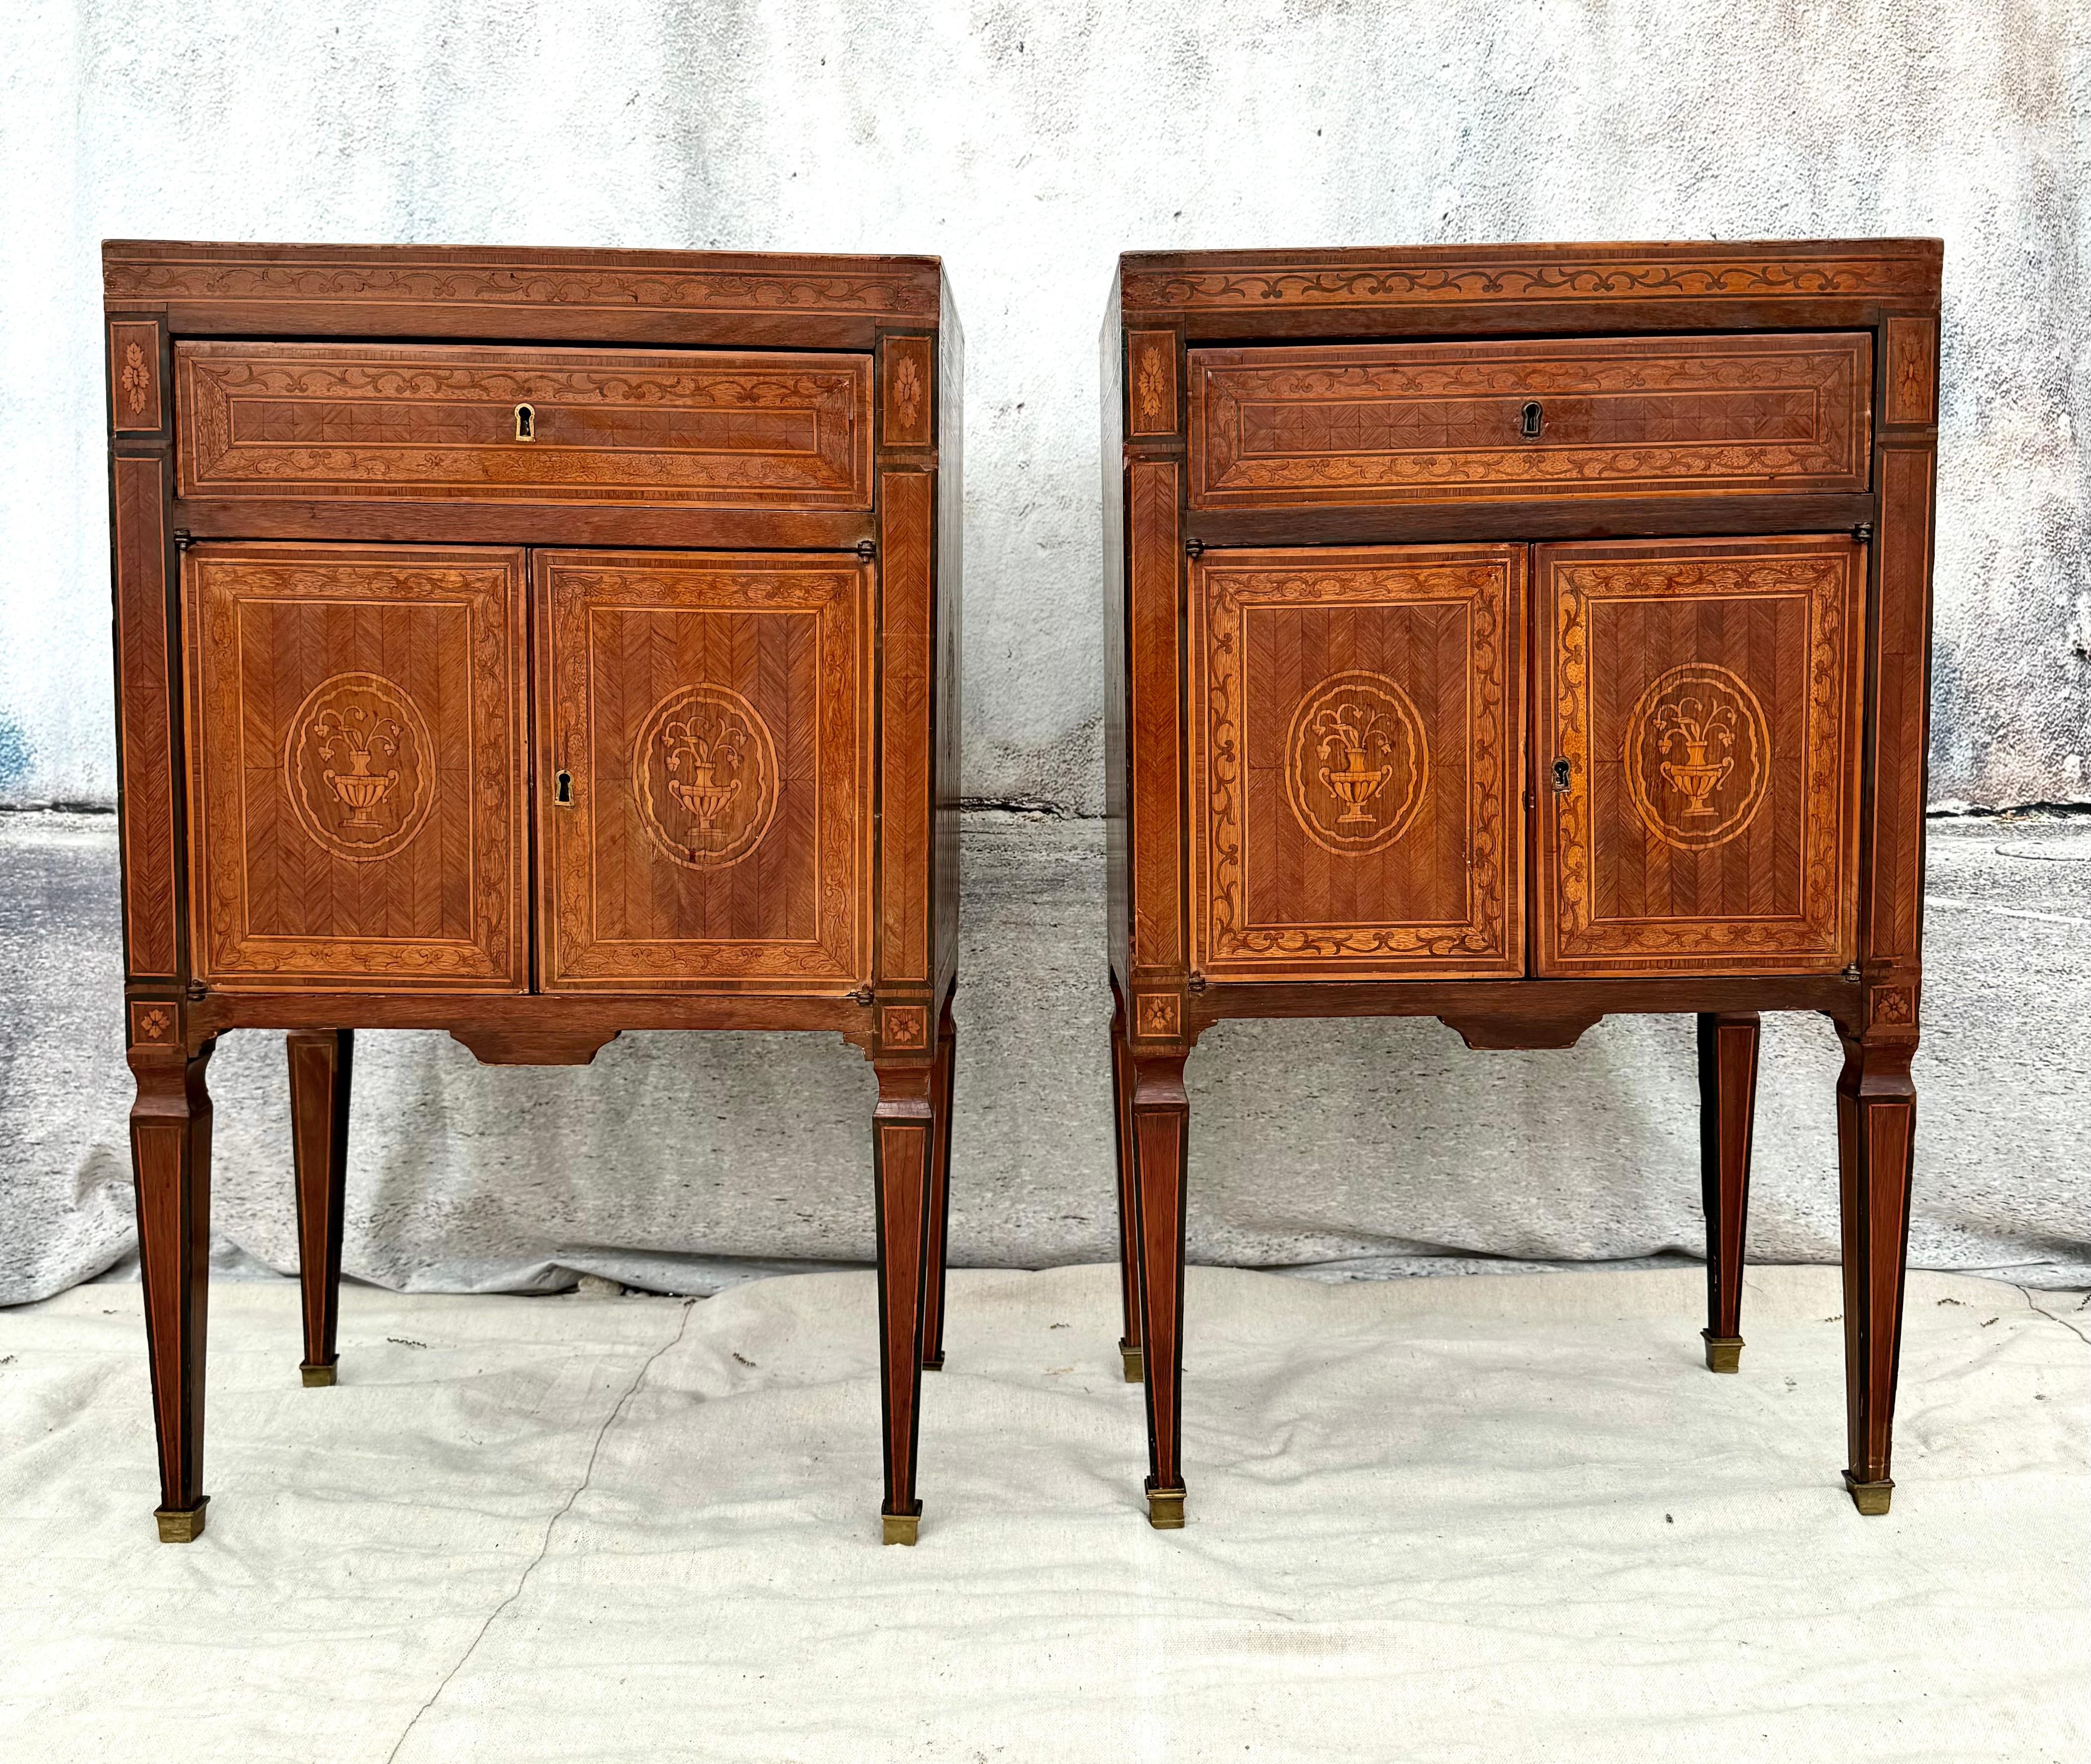 A pair of early 20th century Italian neoclassical style marquetry inlaid bedside cabinets. Each features one drawer over double doors that open to storage space. Cabinets have beautiful inlay of urns filled with floral arrangements on top and front